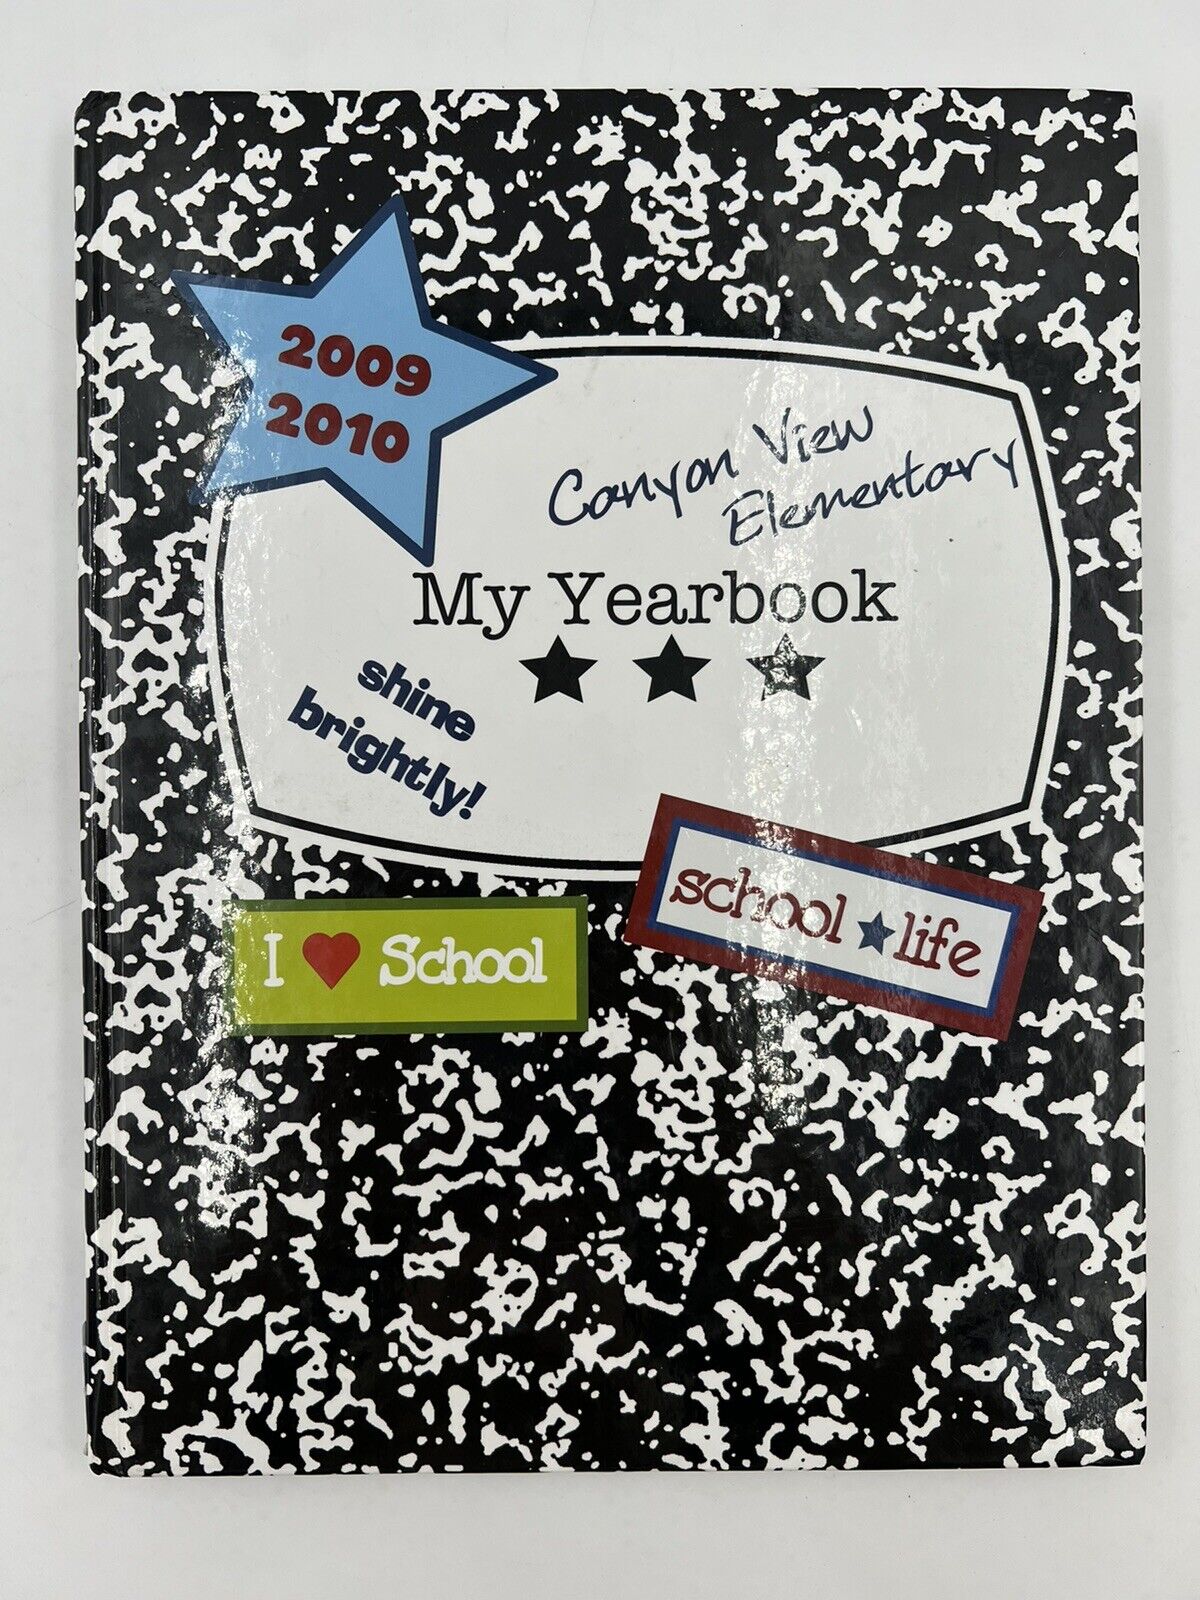 Canyon View elementary school • my yearbook • 2009-2010